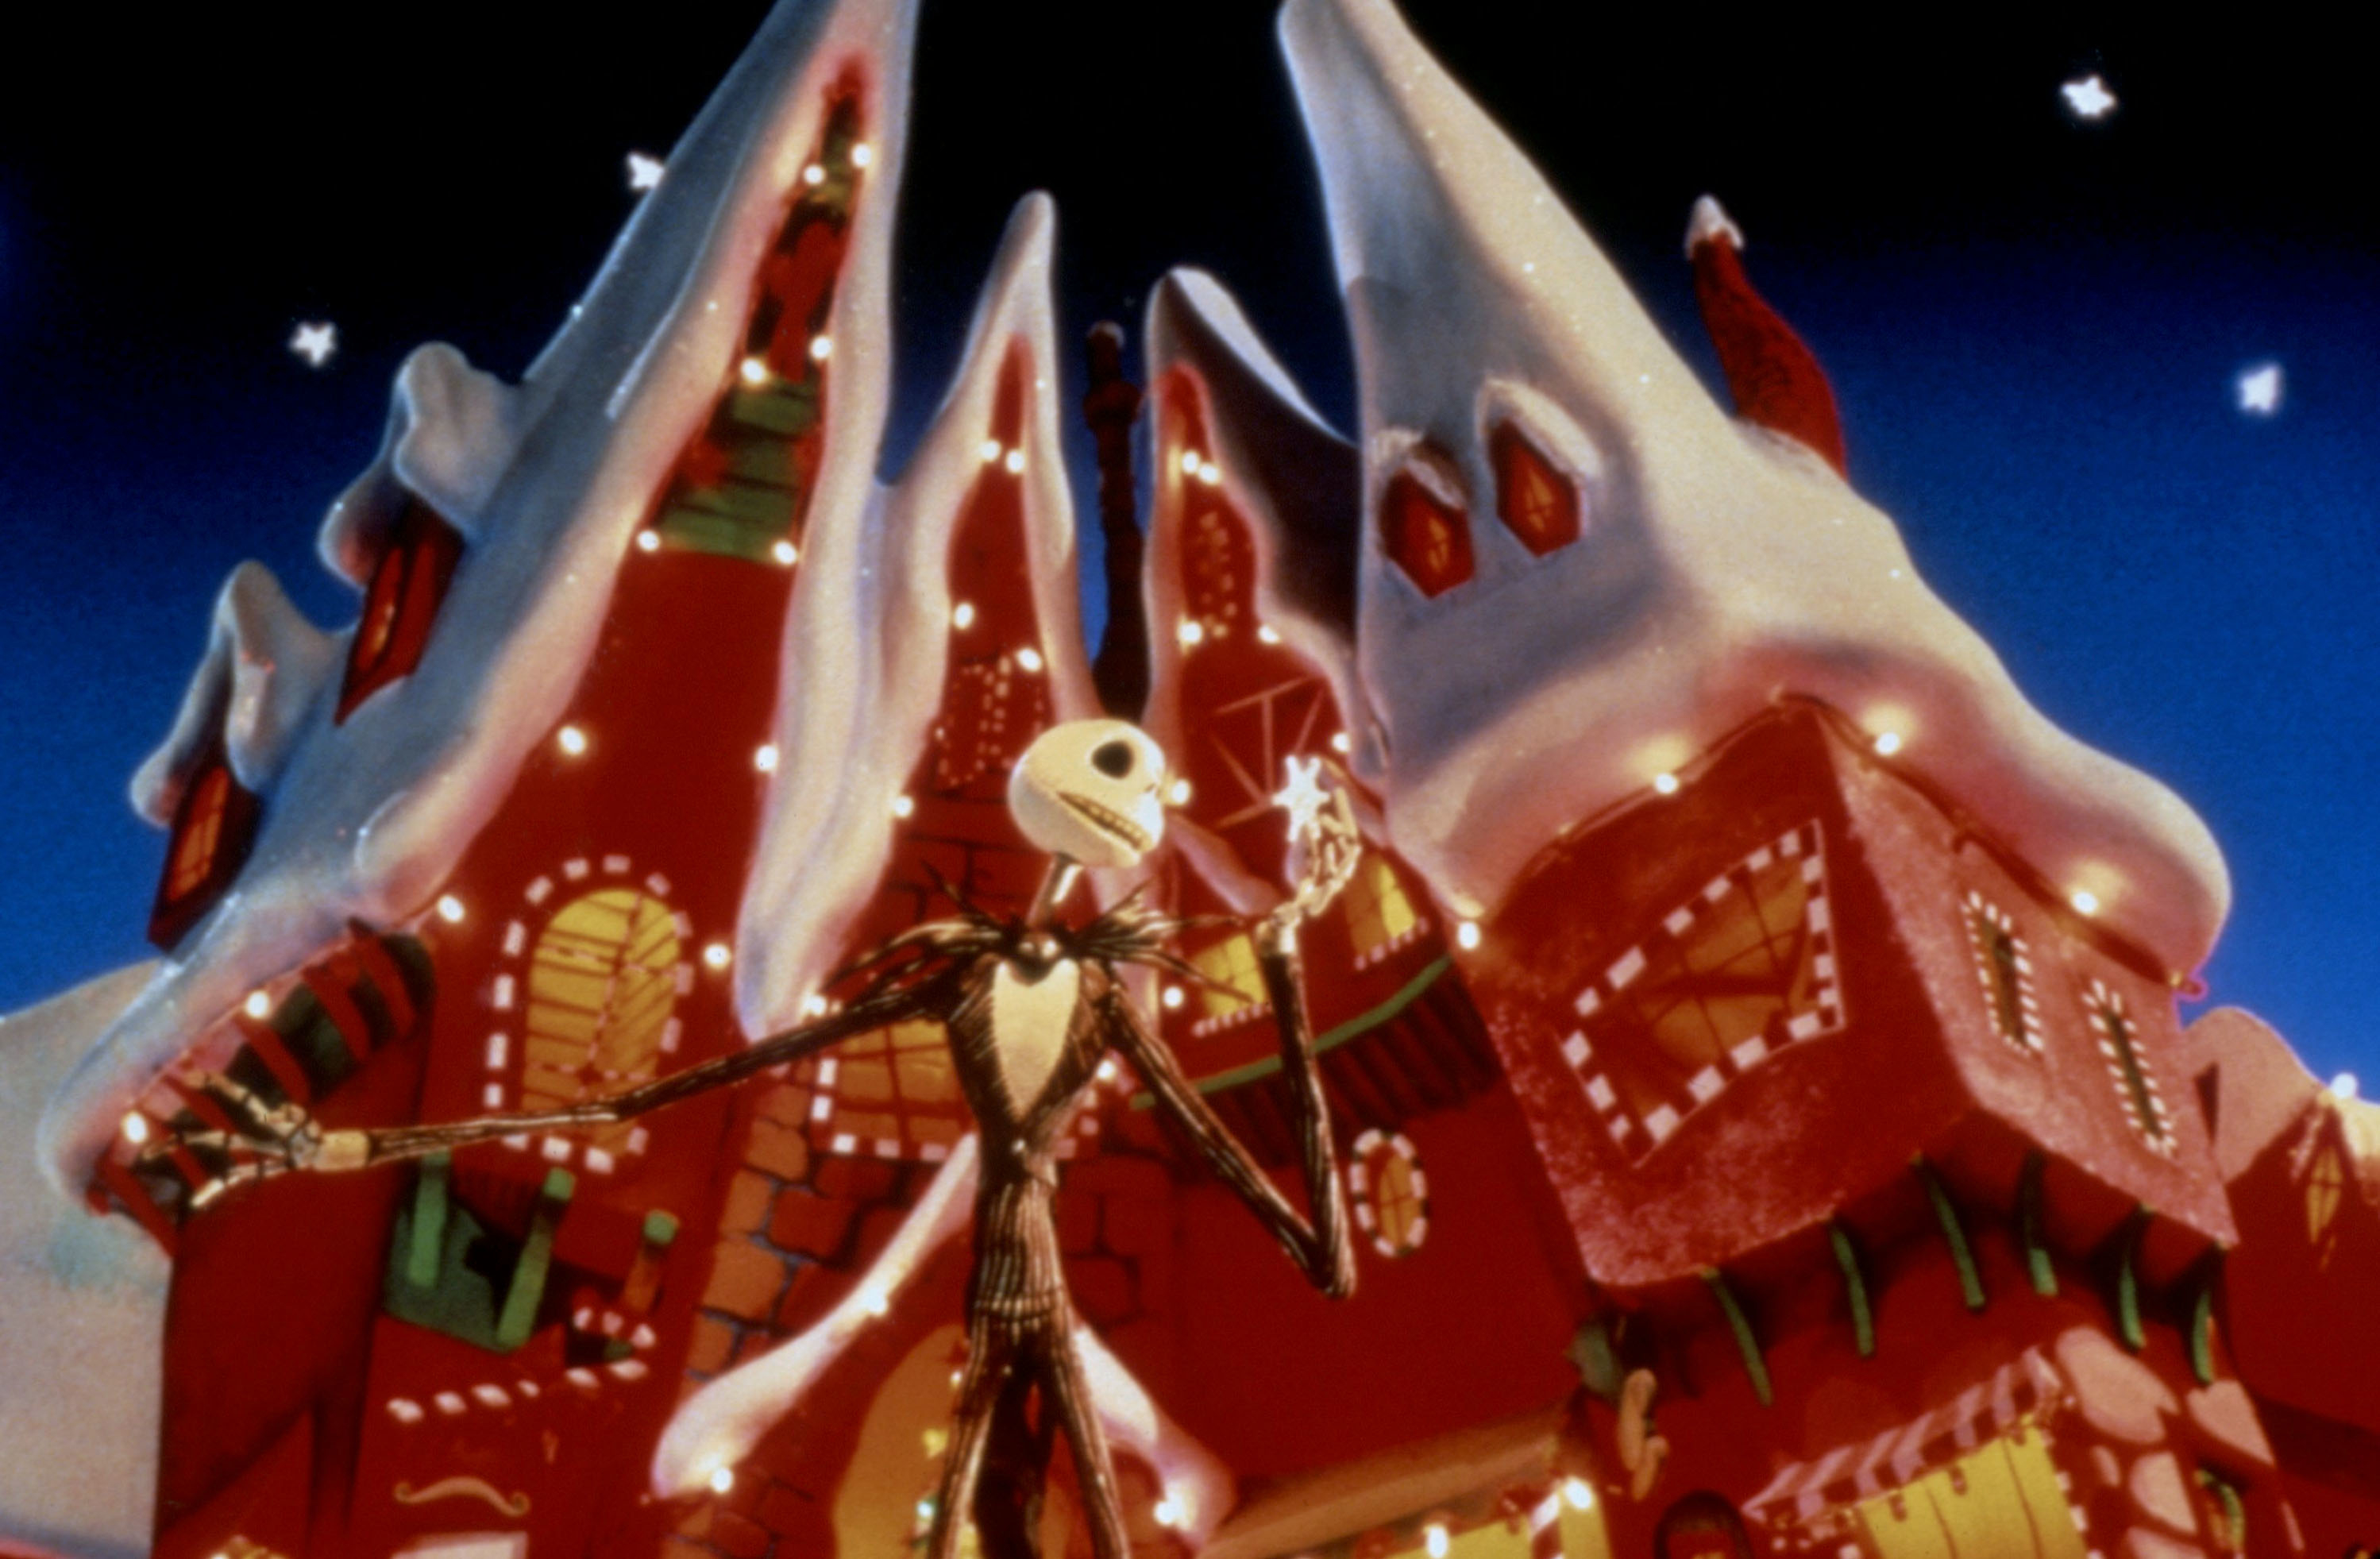 Jack Skellington standing in front of a snow covered christmas house with lights and candy cane window trimmings